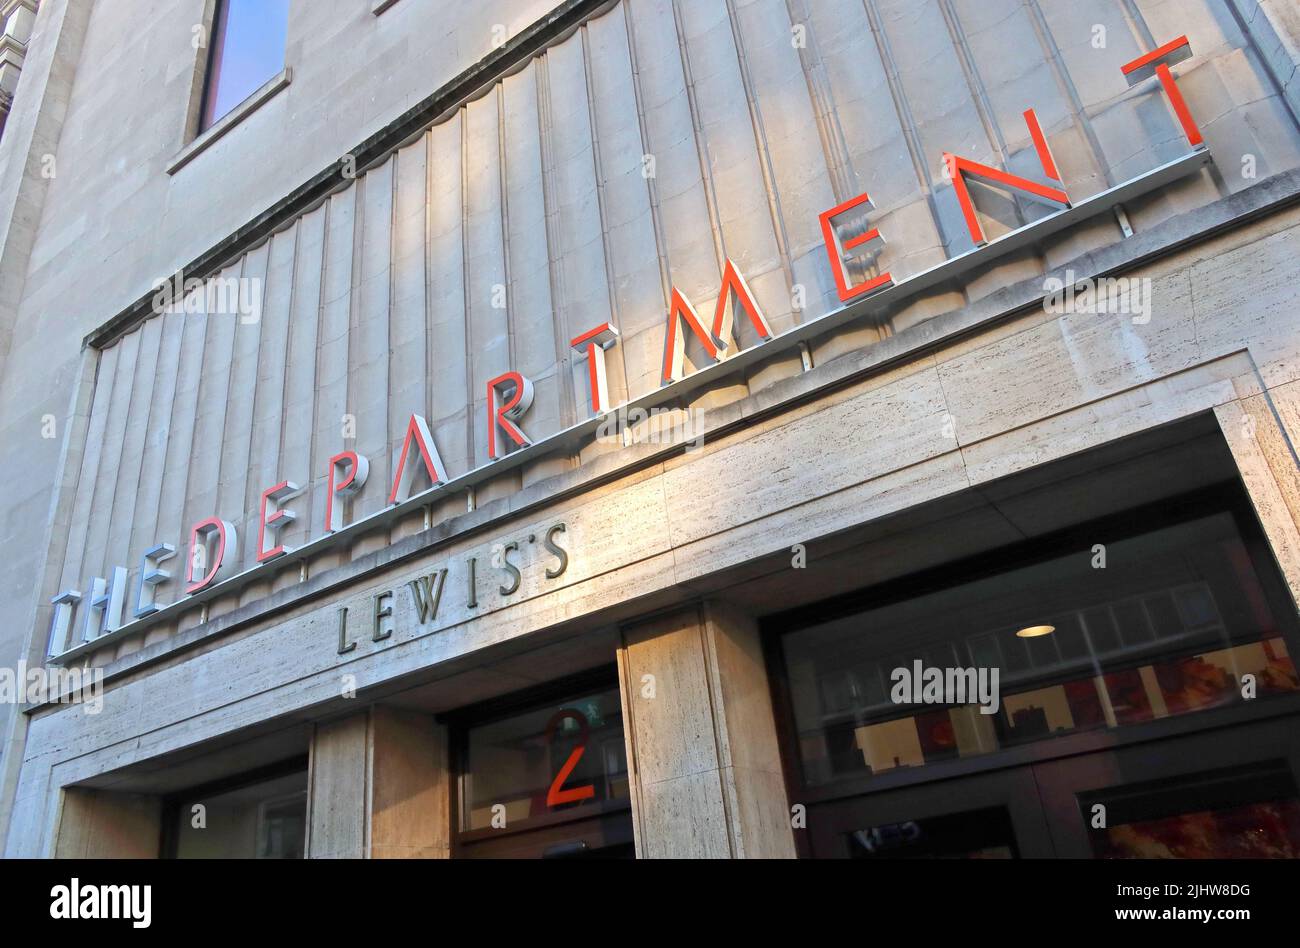 Lewiss, The iconic Lewis department Store,  Ranelagh Street, Liverpool, Merseyside, England, UK, L1 1QE Stock Photo